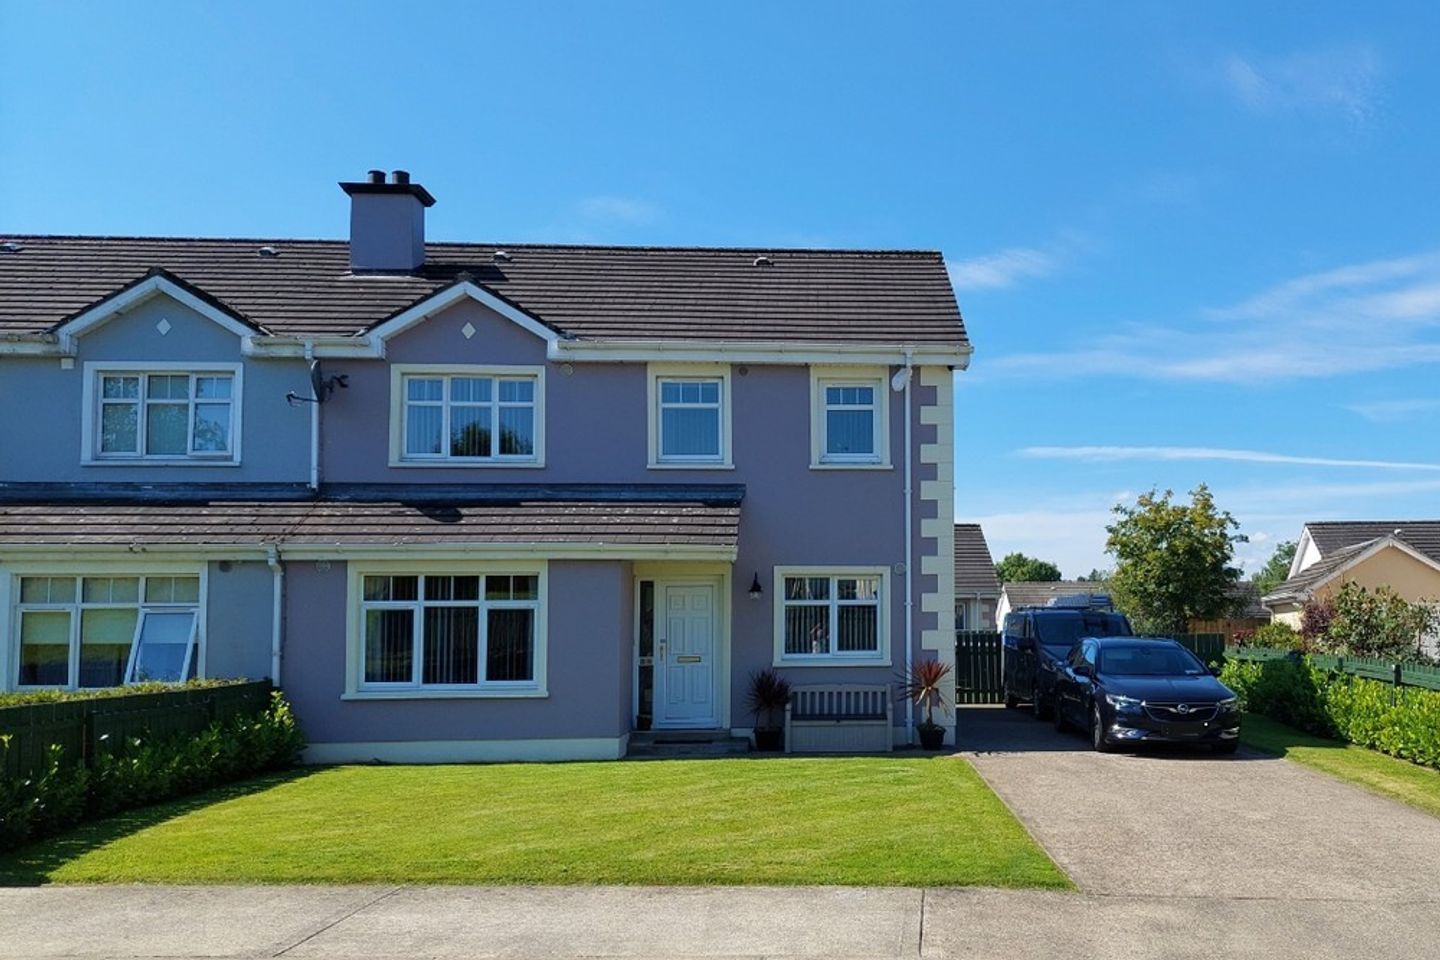 21 Beechwood Grove, Convoy, Co. Donegal